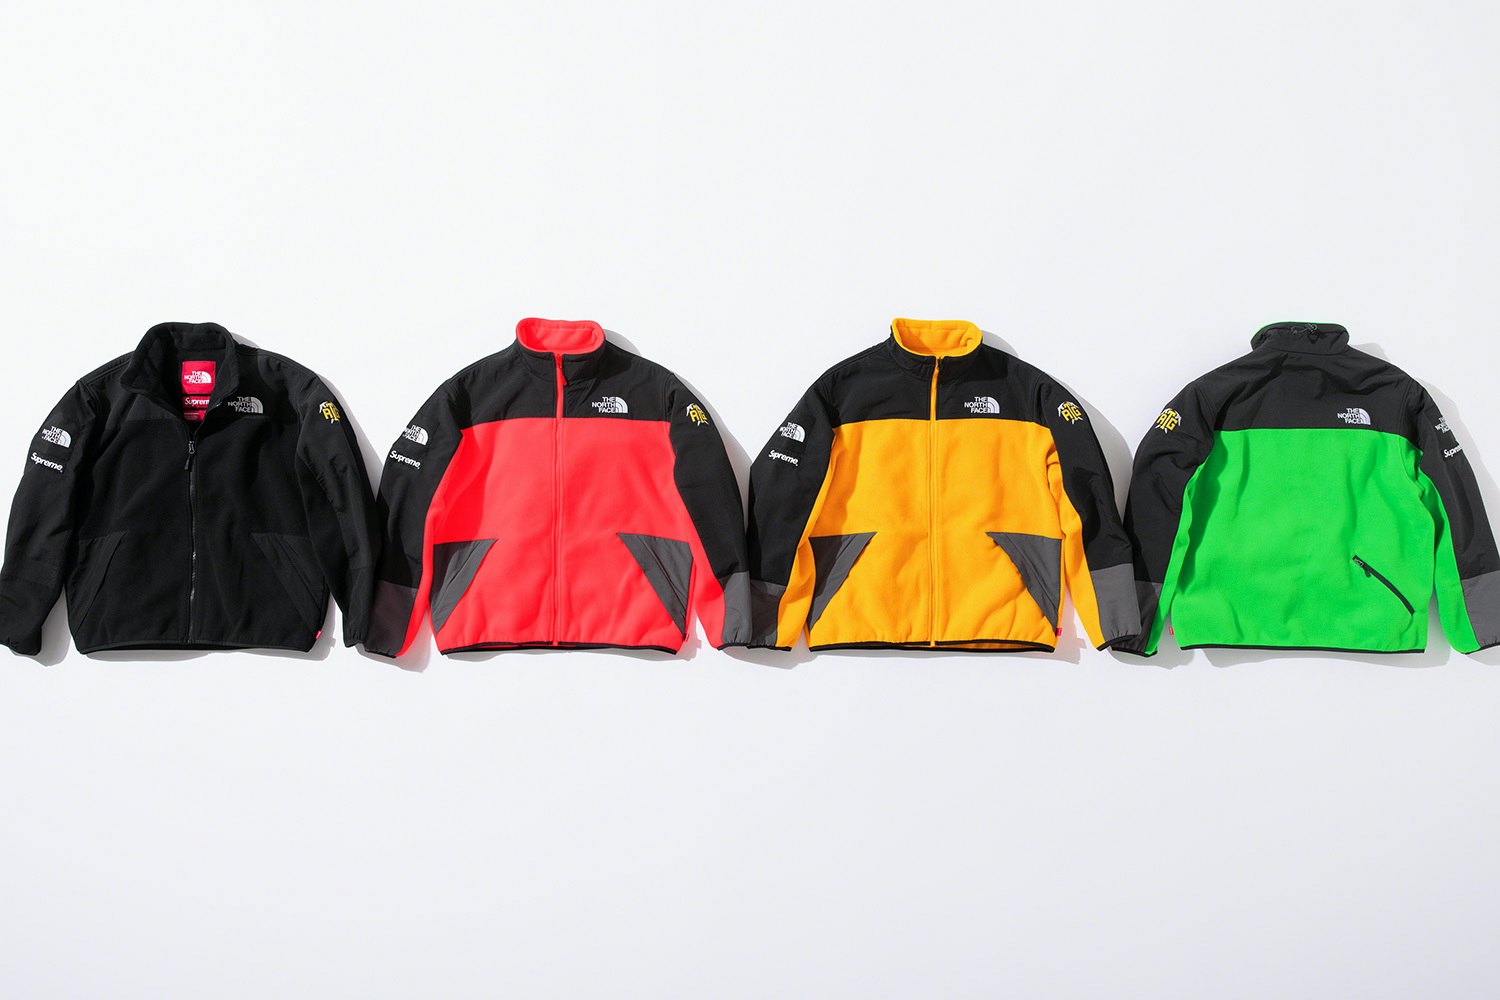 Supreme is bringing back The North Face's rare RTG collection